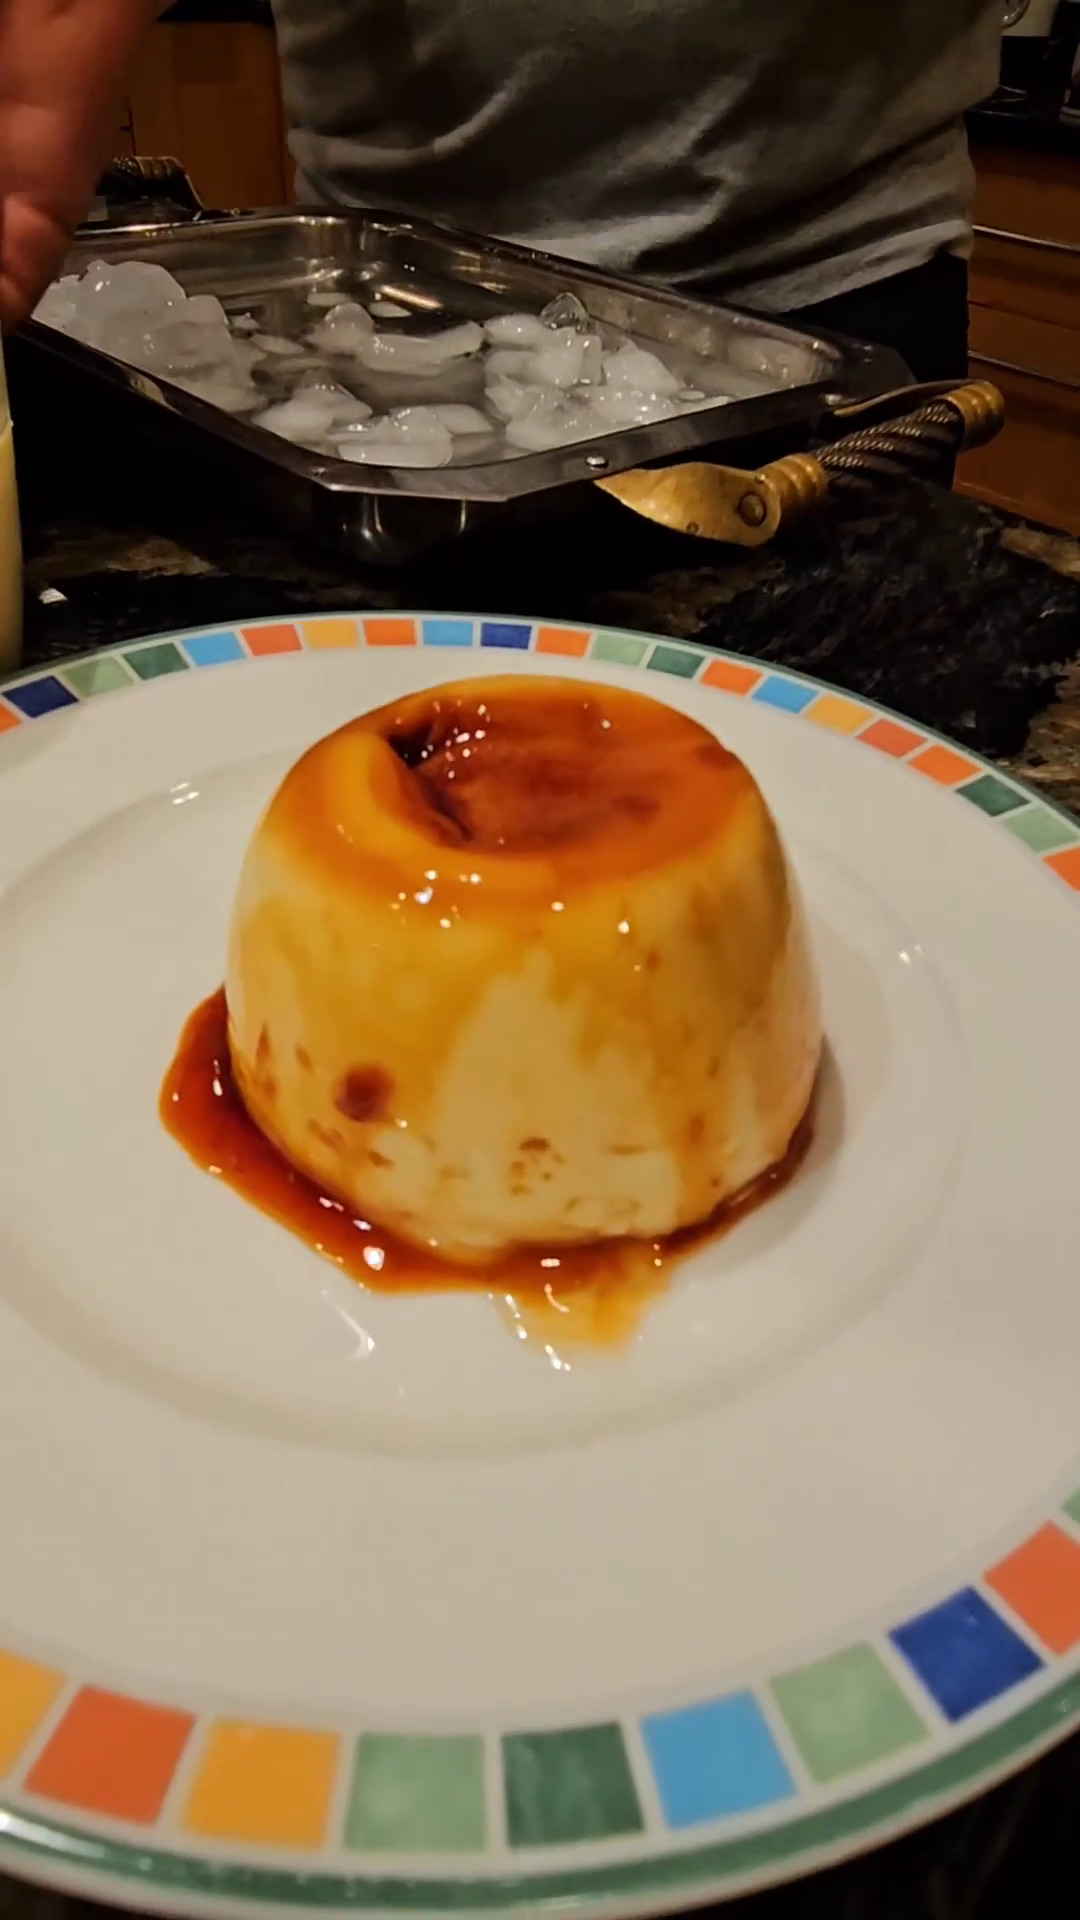 A finished microwave flan turned upside down on a plate.